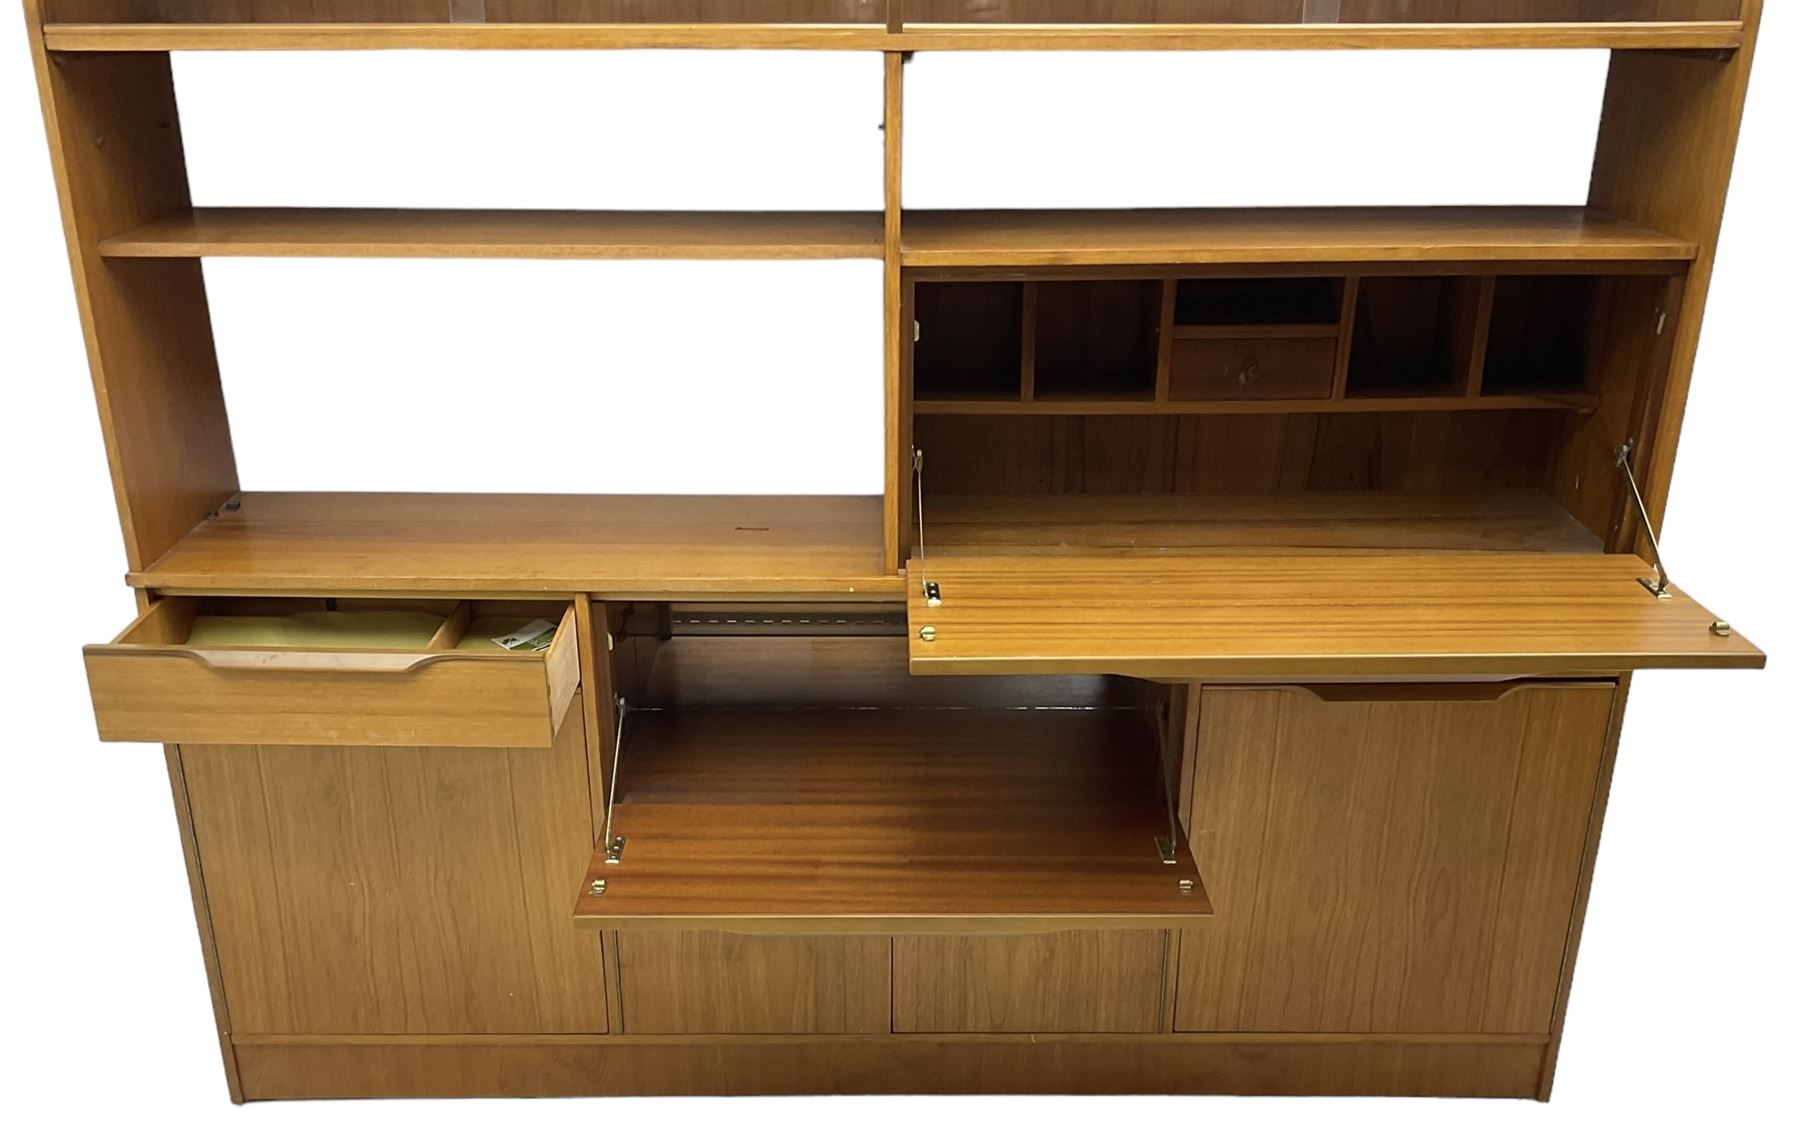 Mid-20th century teak sectional wall unit - Image 6 of 6